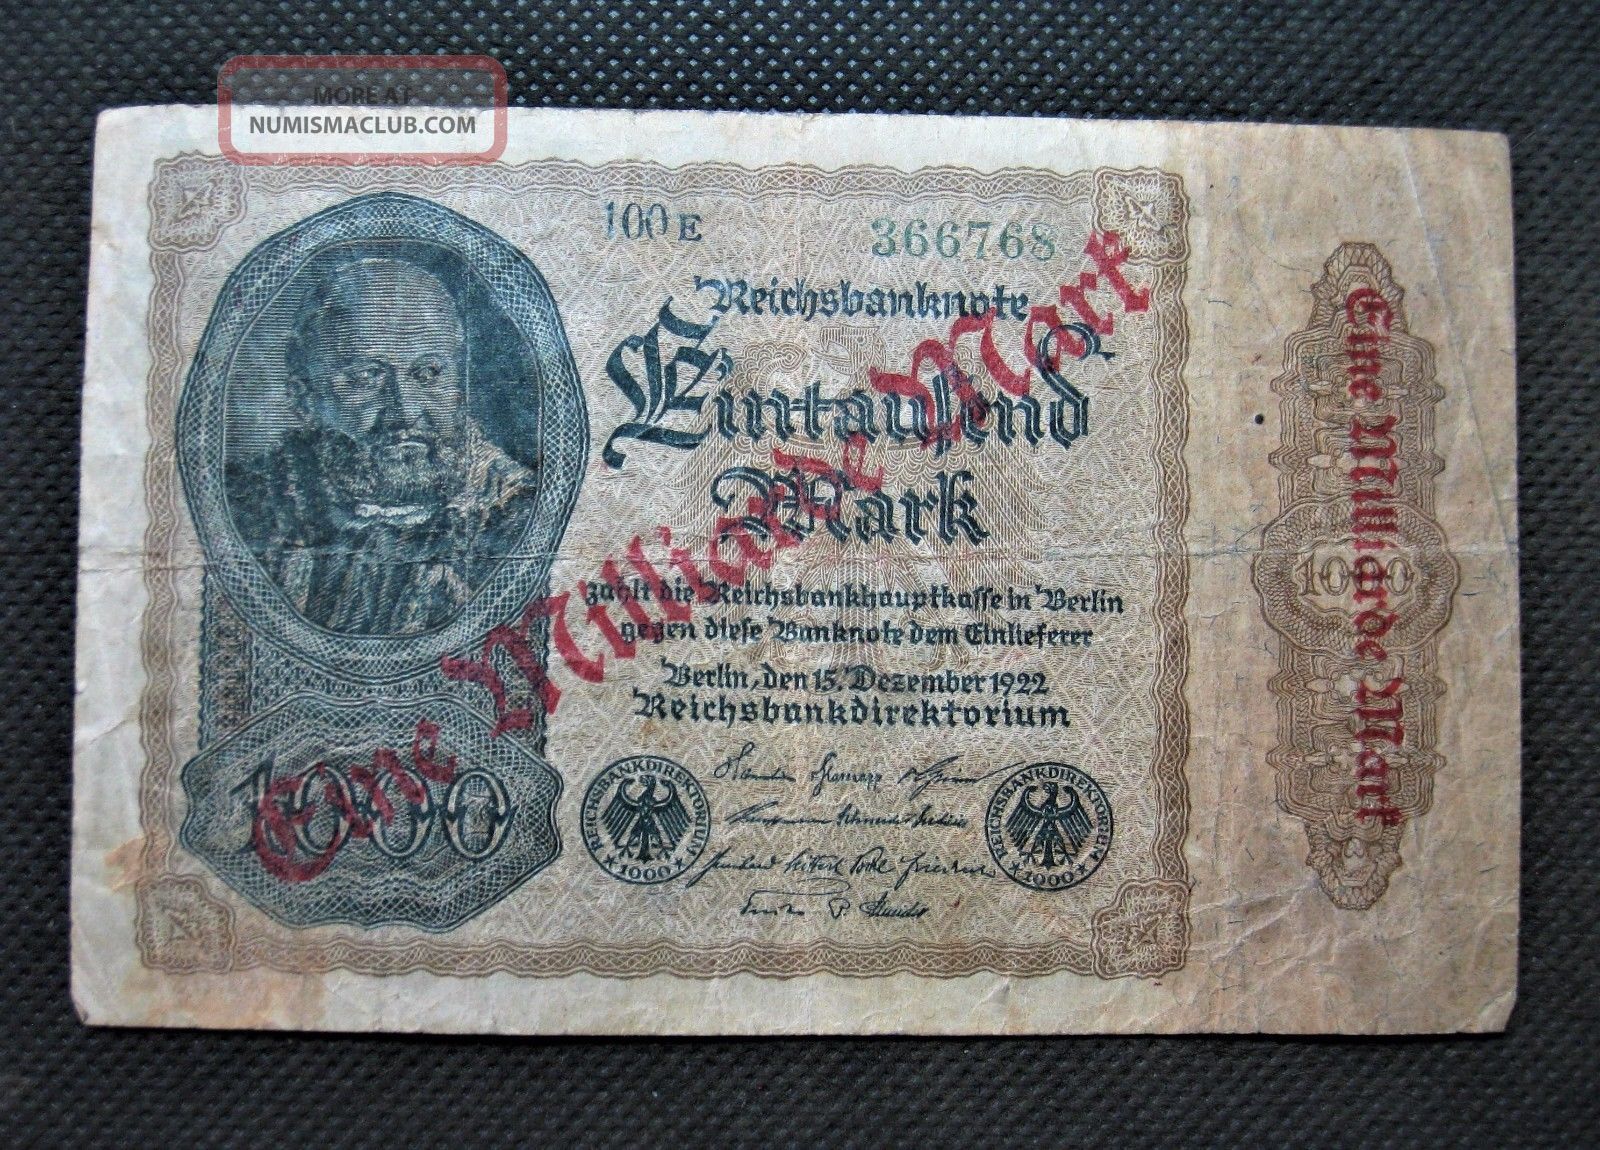 Old Bank Note Germany One Milliard Mark Banknote 1922 Hyperinflation - 366768 Europe photo